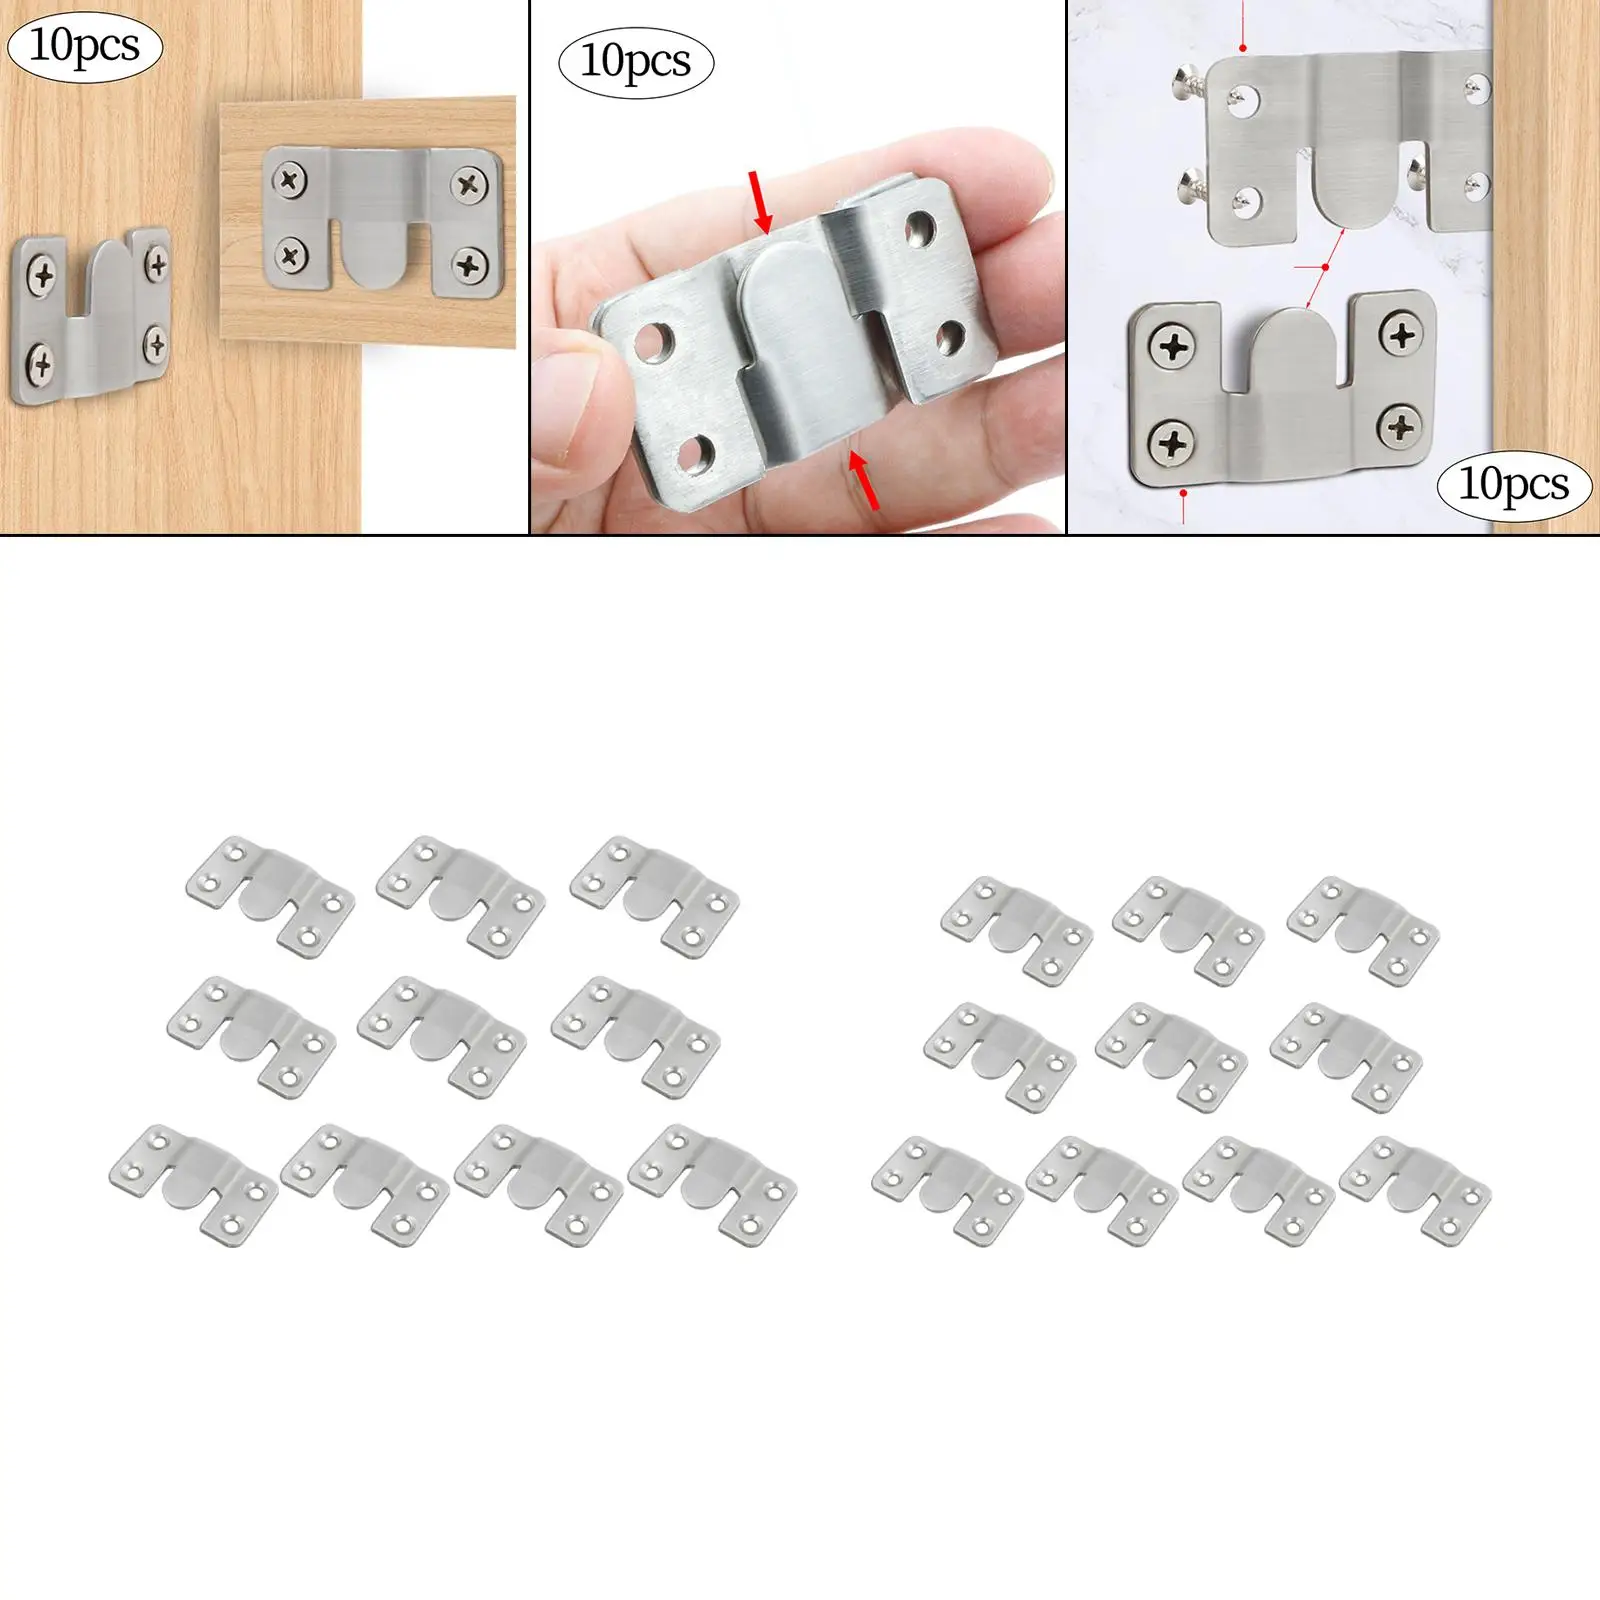 10x Flush Mount Bracket Headboard Wall Mount Hardware Z Clip Photo Frame Hooks for Hardware Mirrors Wall Cabinet Picture Display